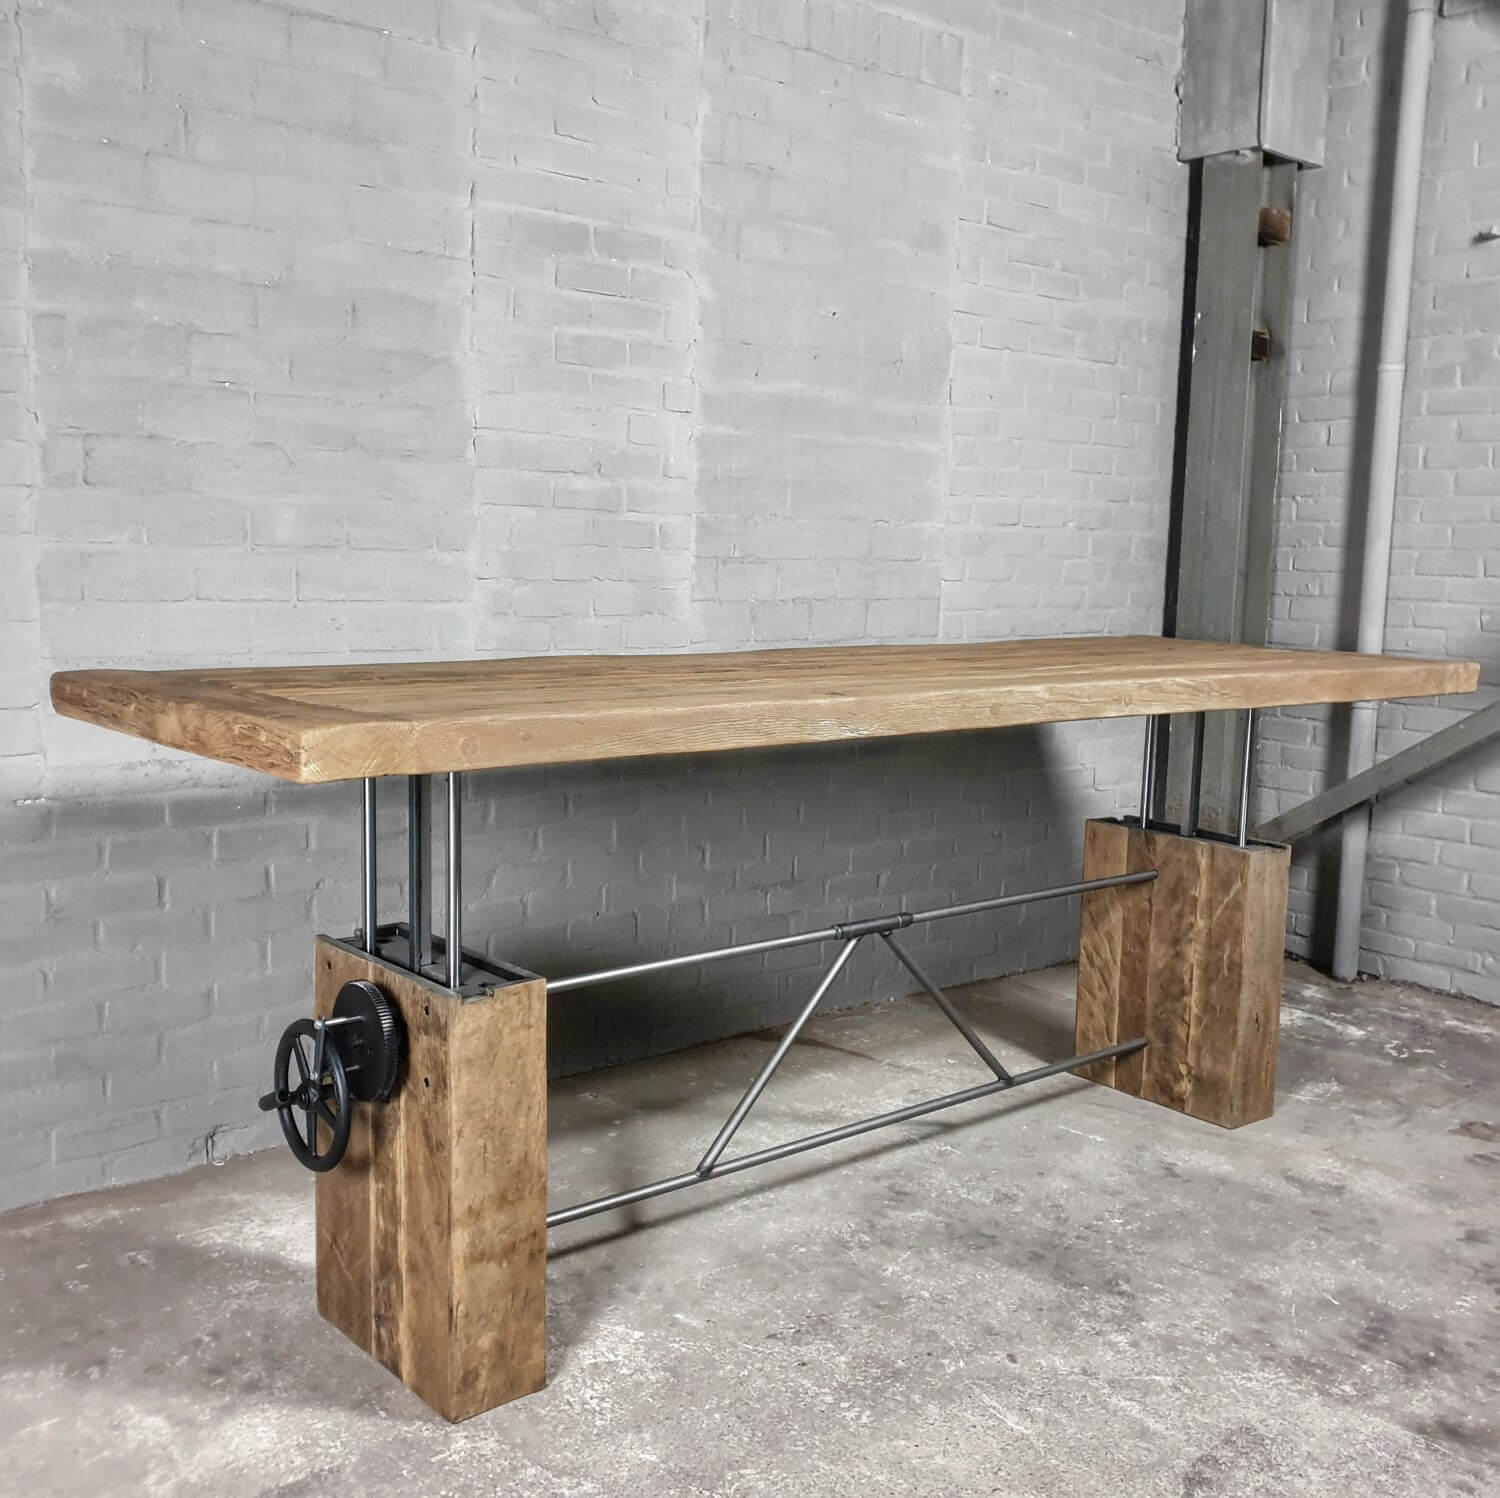 A charming Crank table made of aged pine wood.